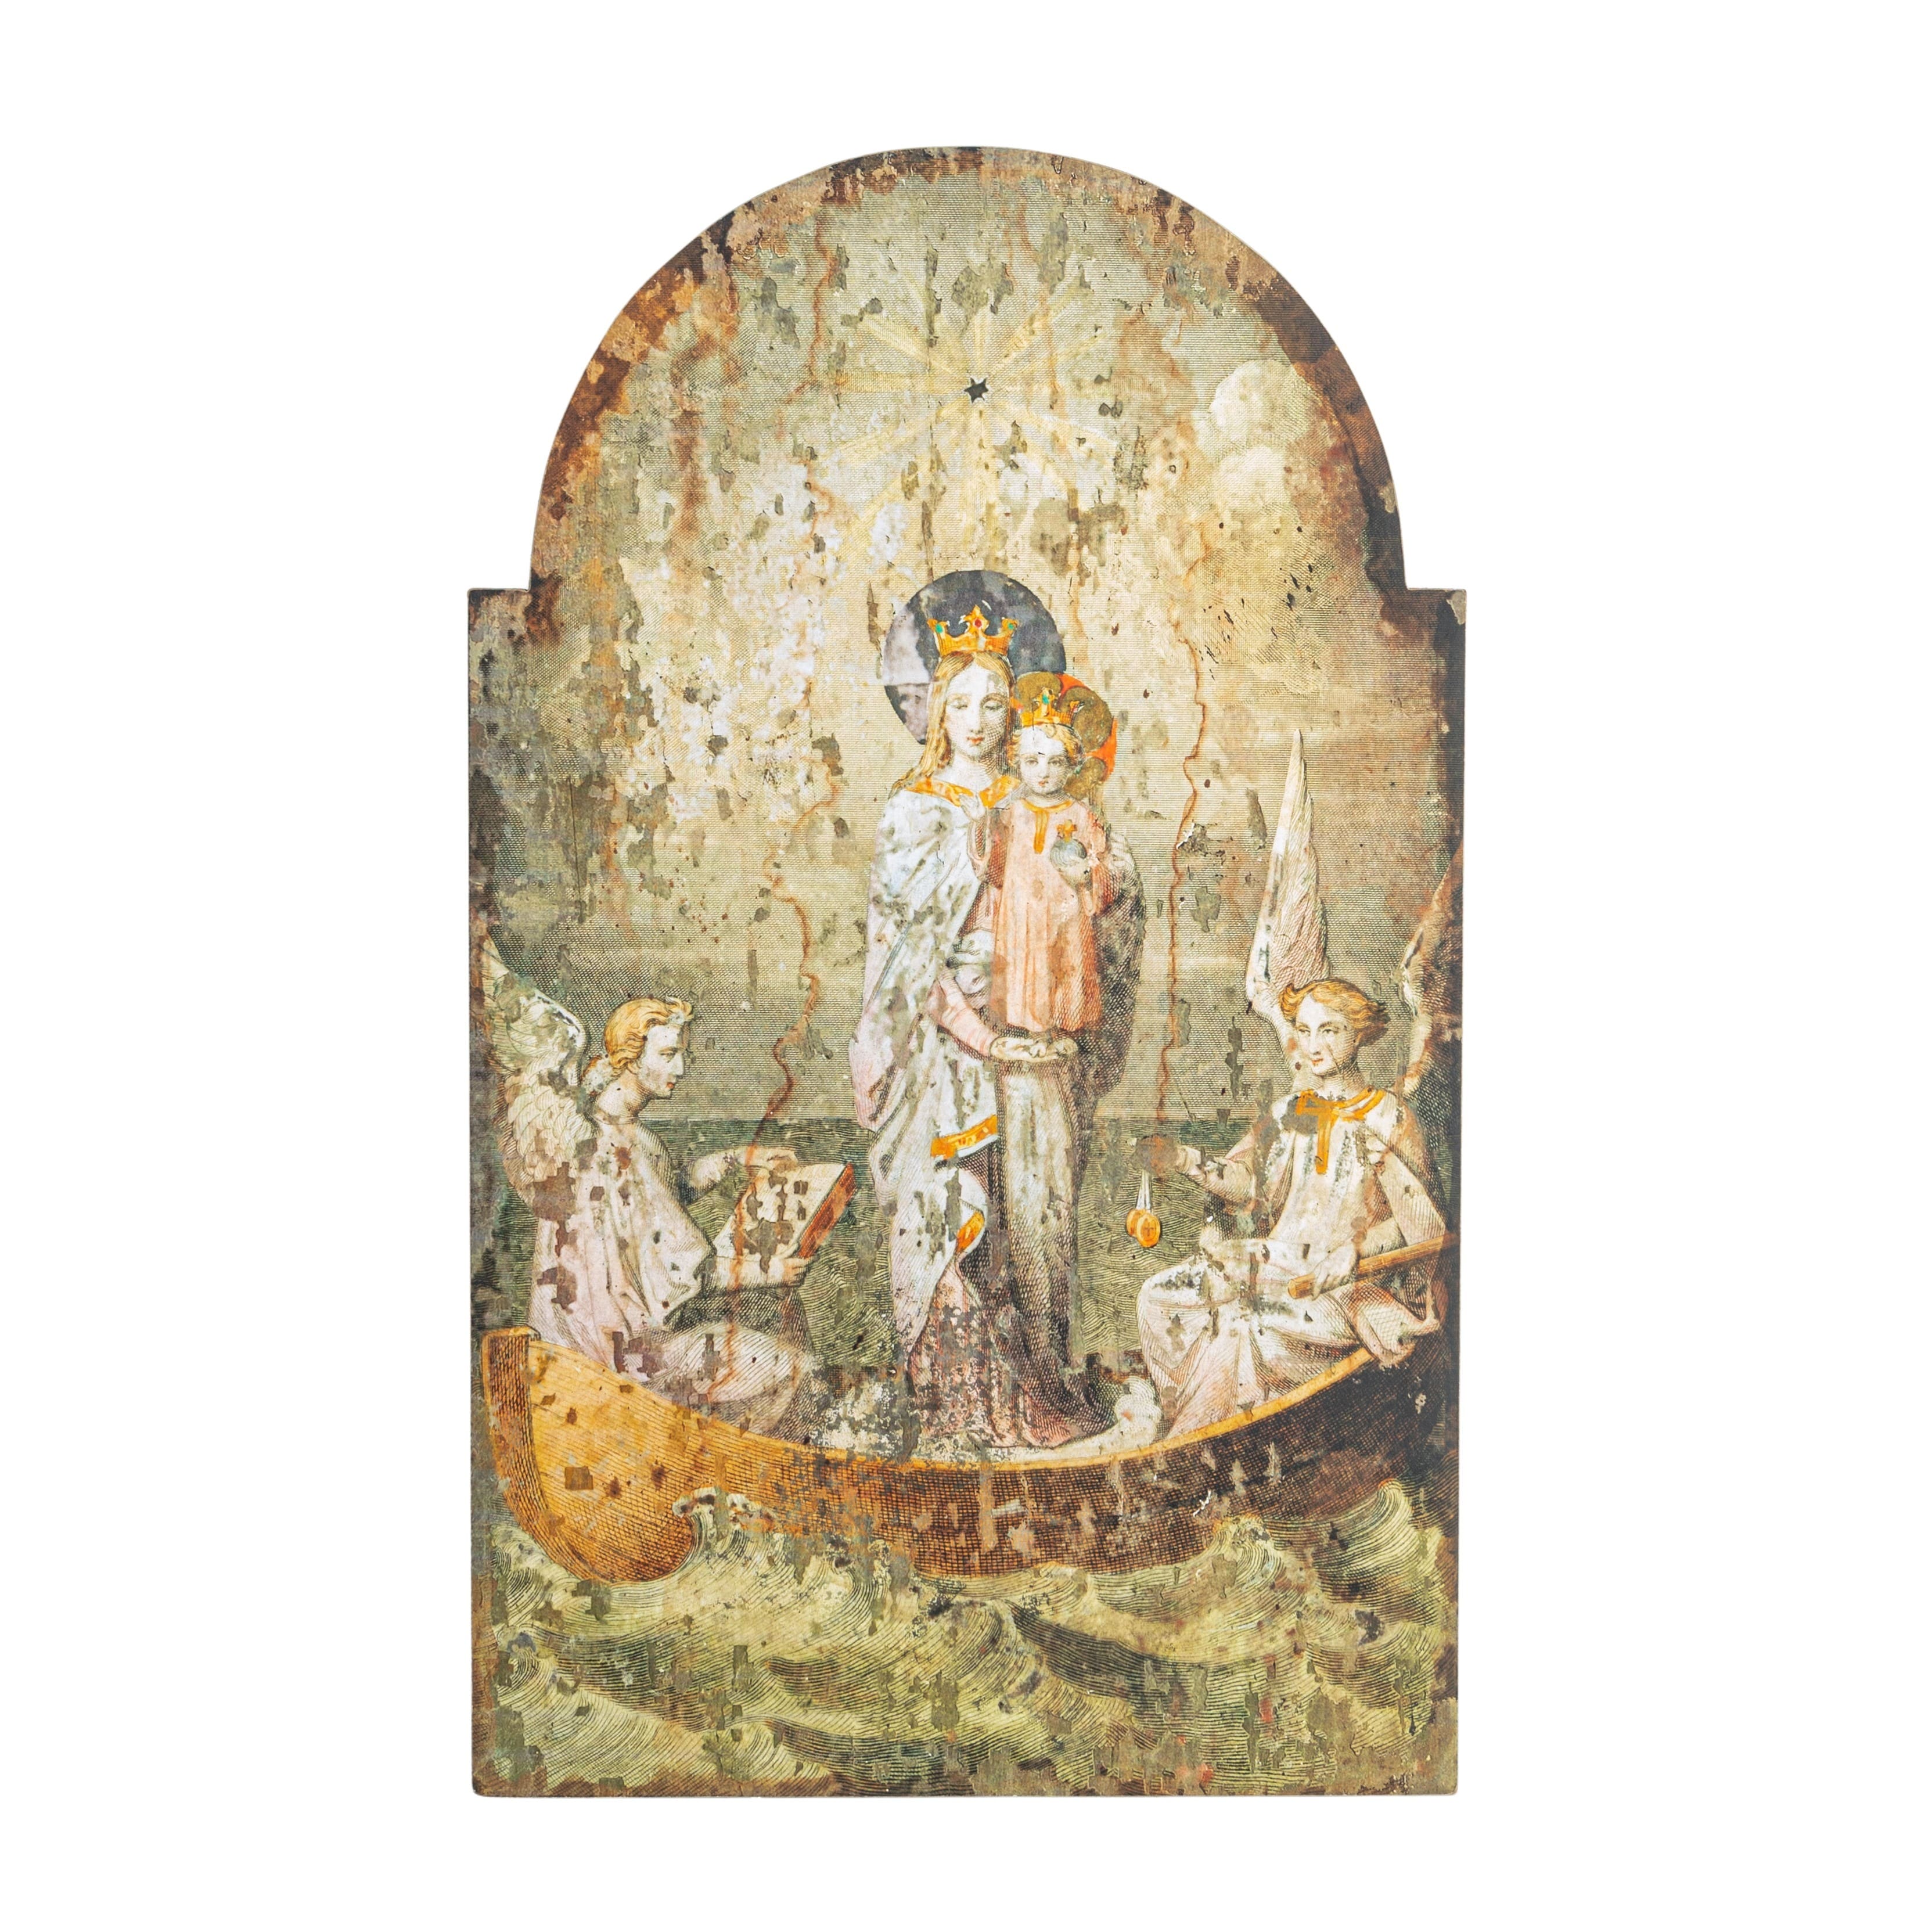 Vintage Mary &#x26; Angels Image on Decorative Wood Wall D&#xE9;cor